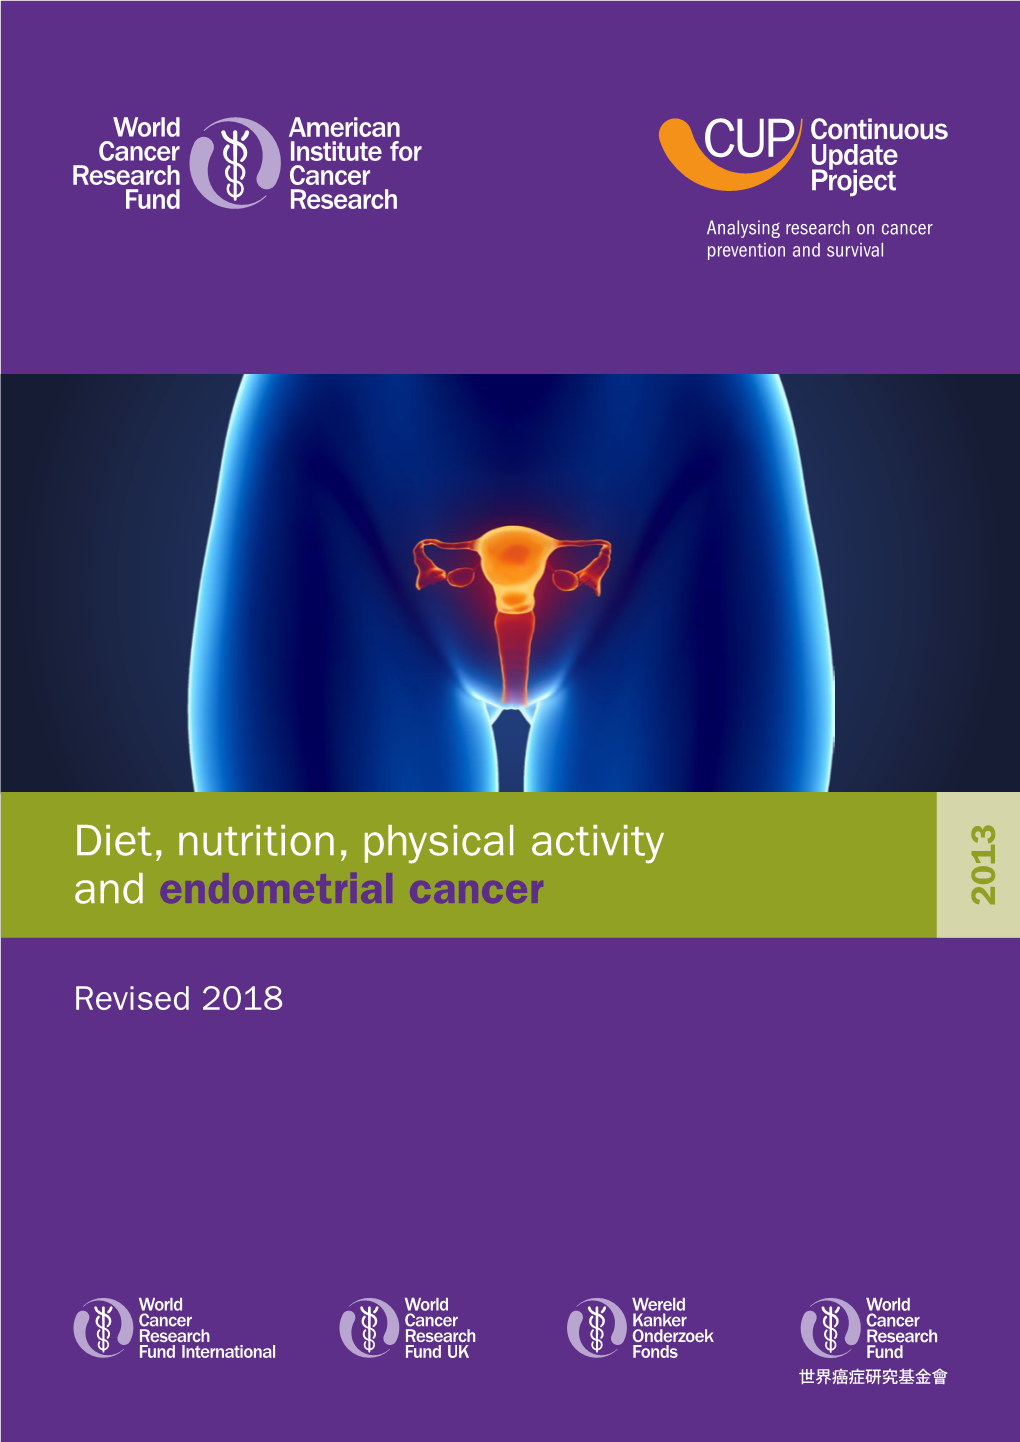 Diet, Nutrition, Physical Activity and Endometrial Cancer